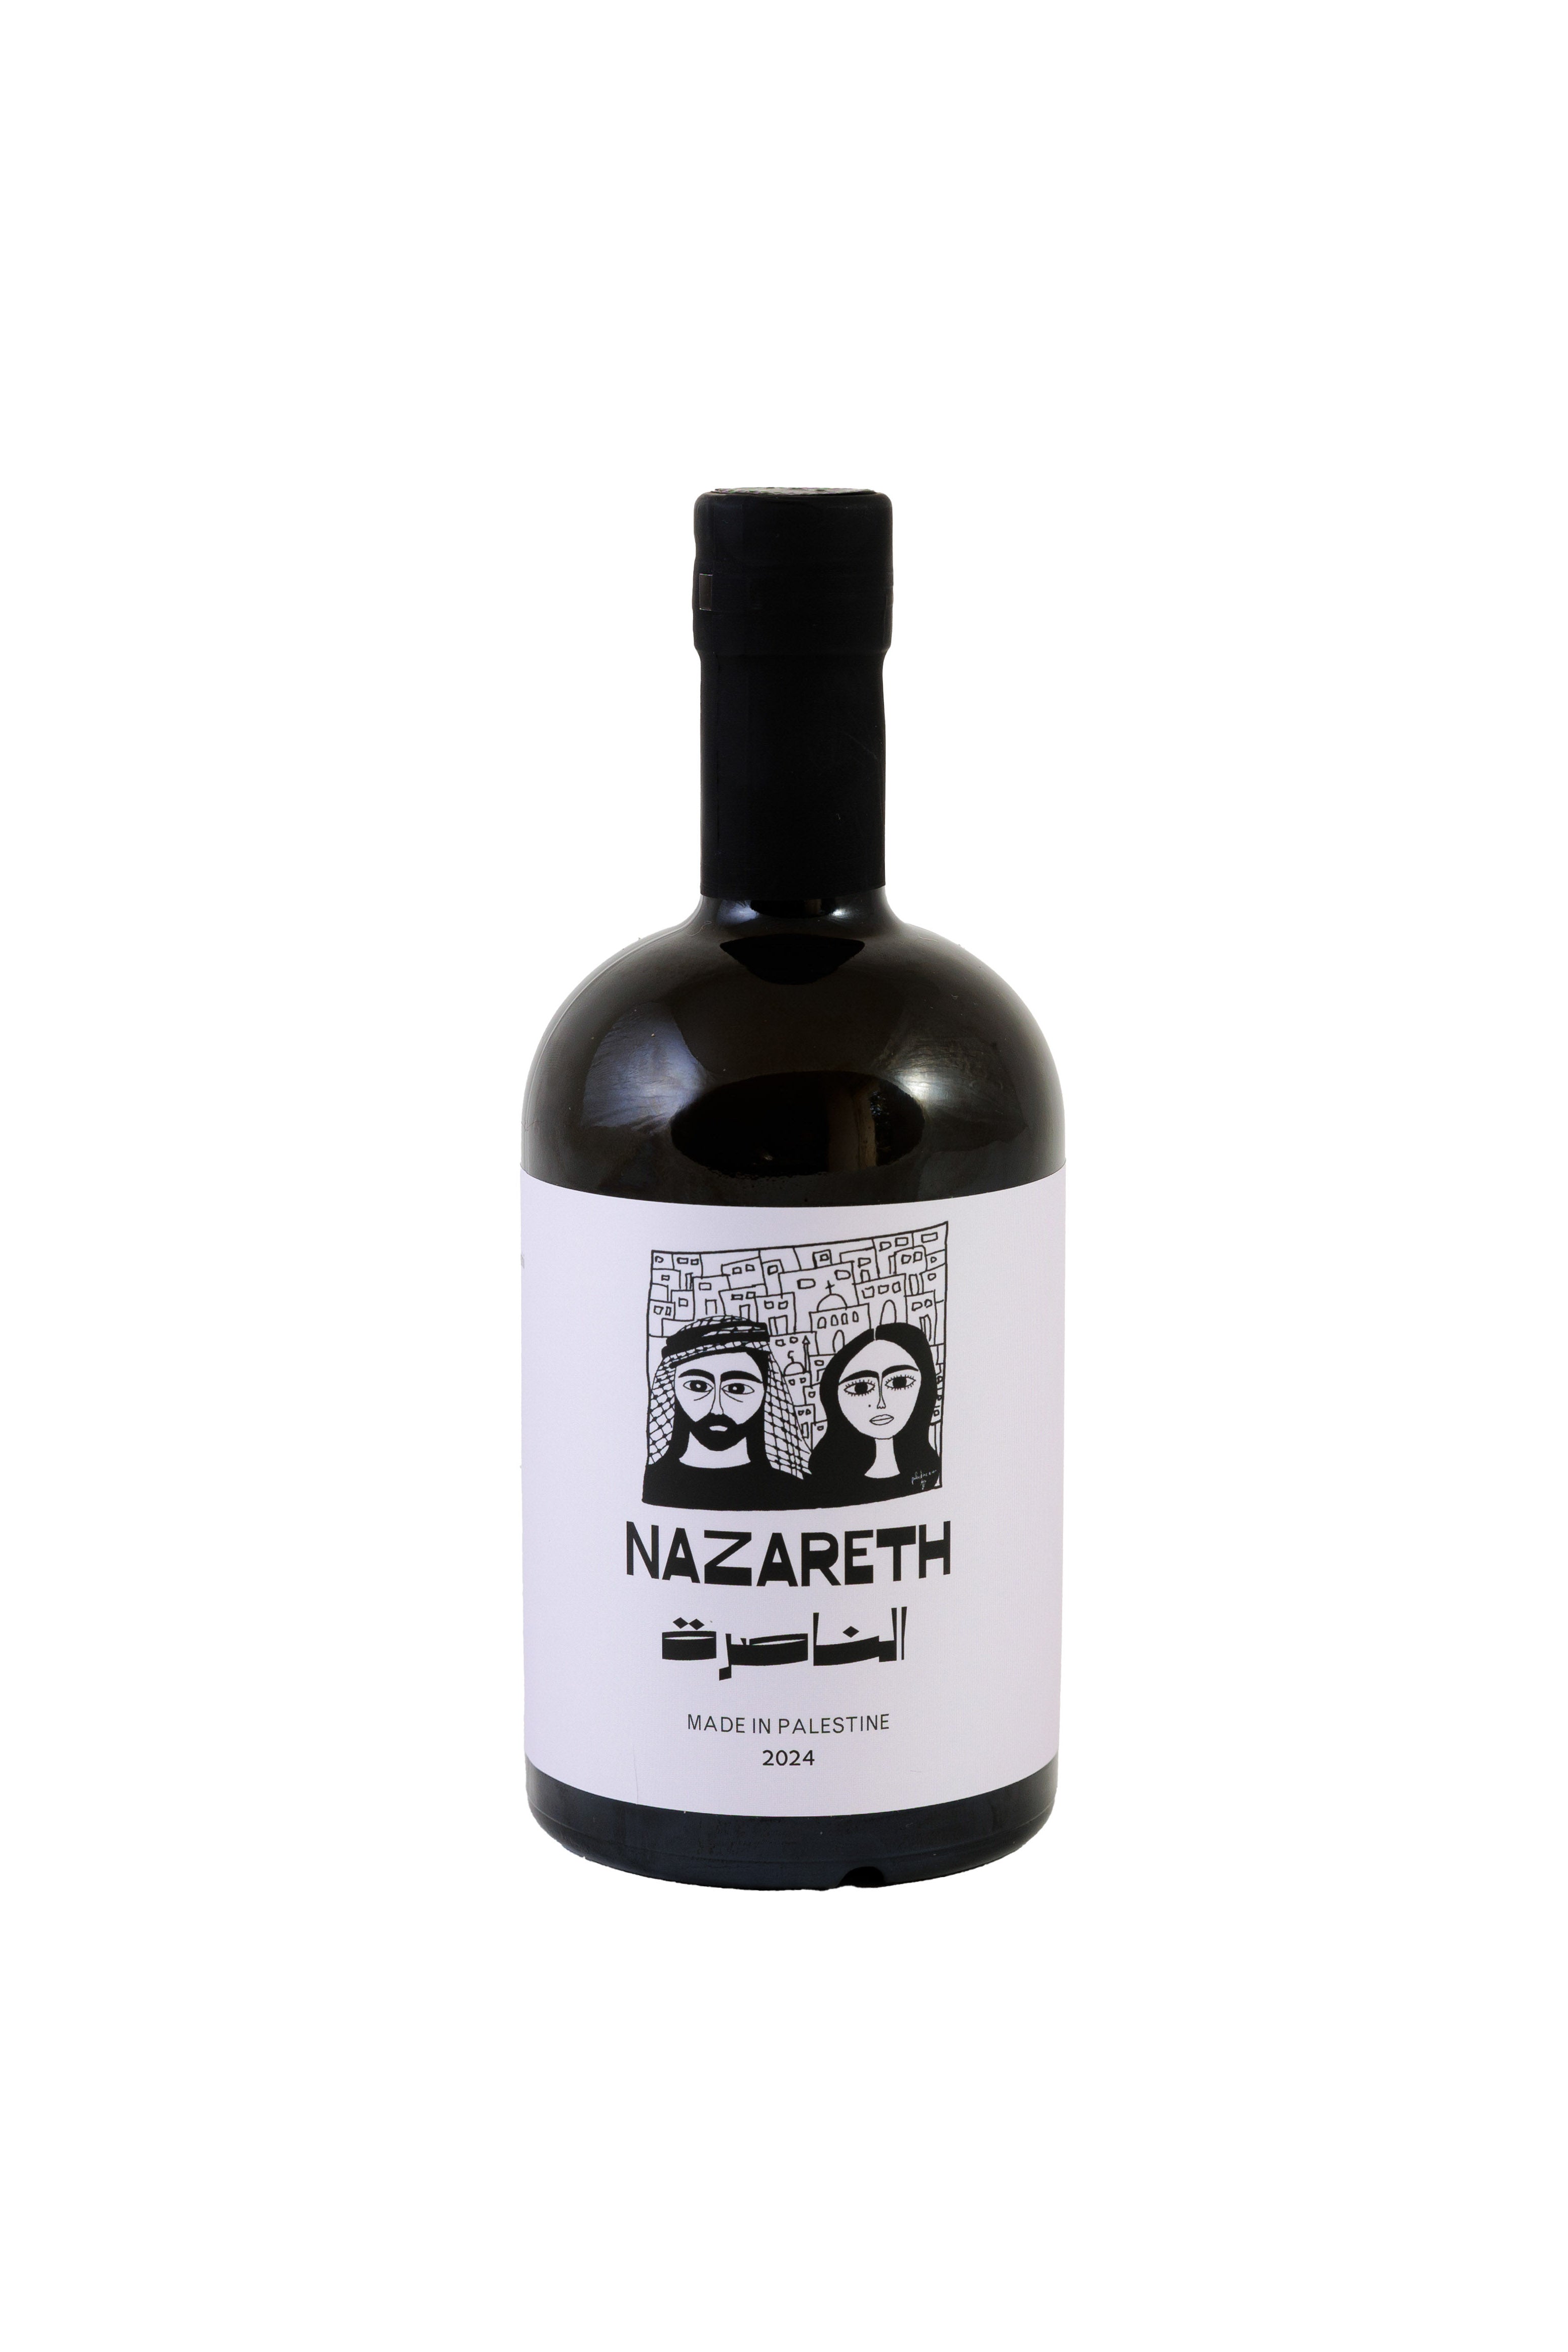 Nazareth's Coratina Cold Pressed Olive Oil - Grassy, Tangy and Bitter taste [Harvest Year: 2023]